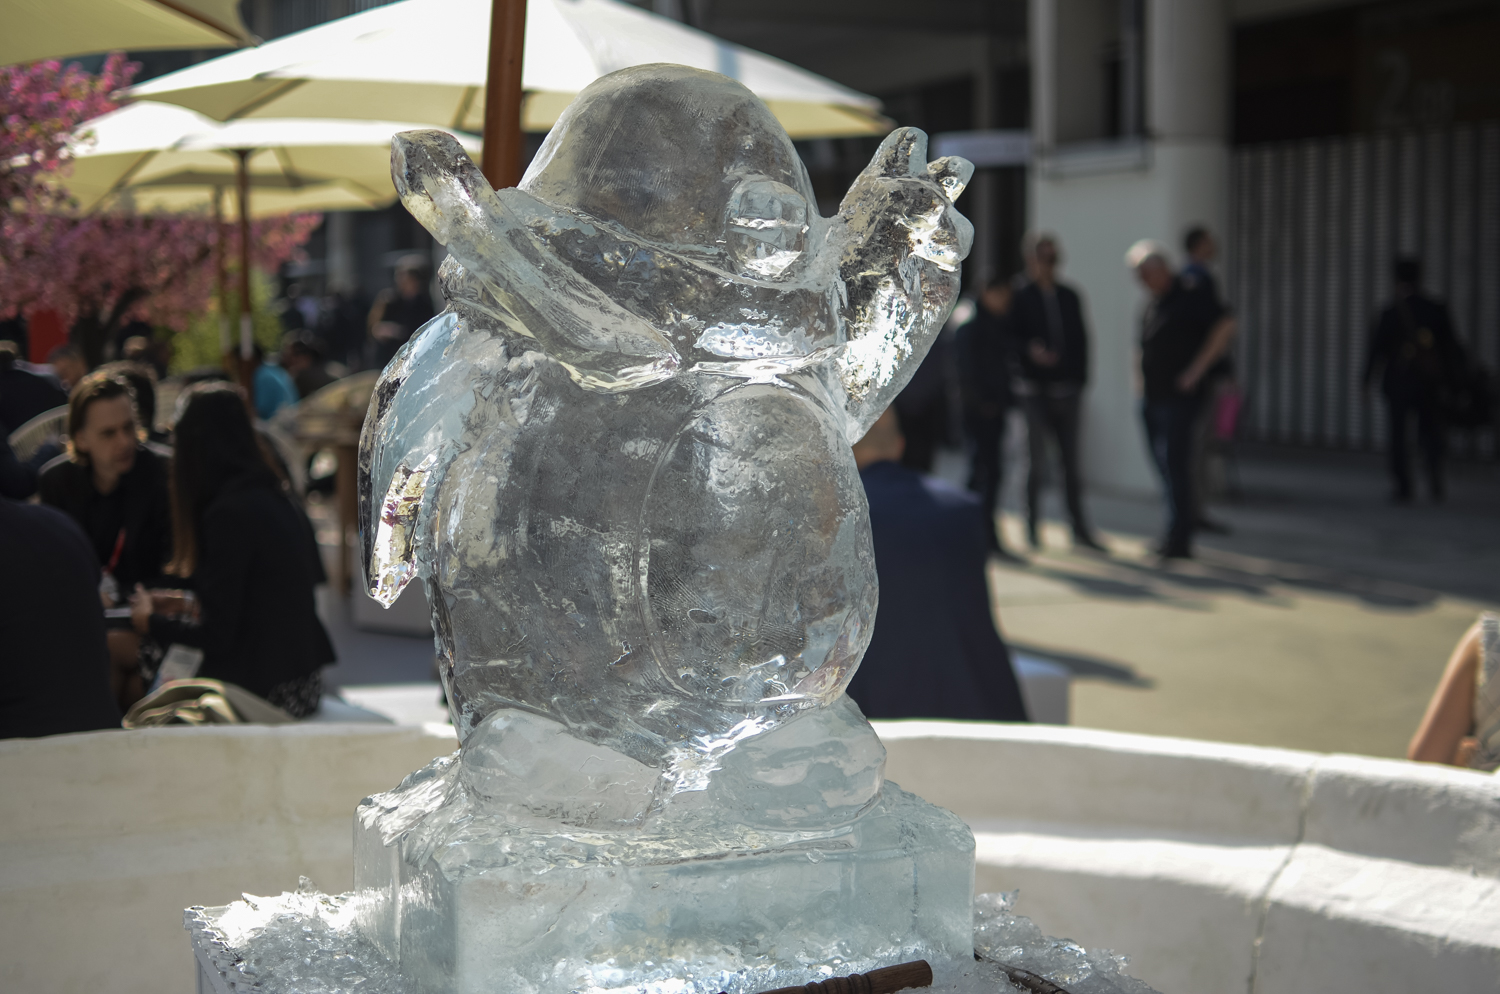 android global village mwc 2017 ice sculpture